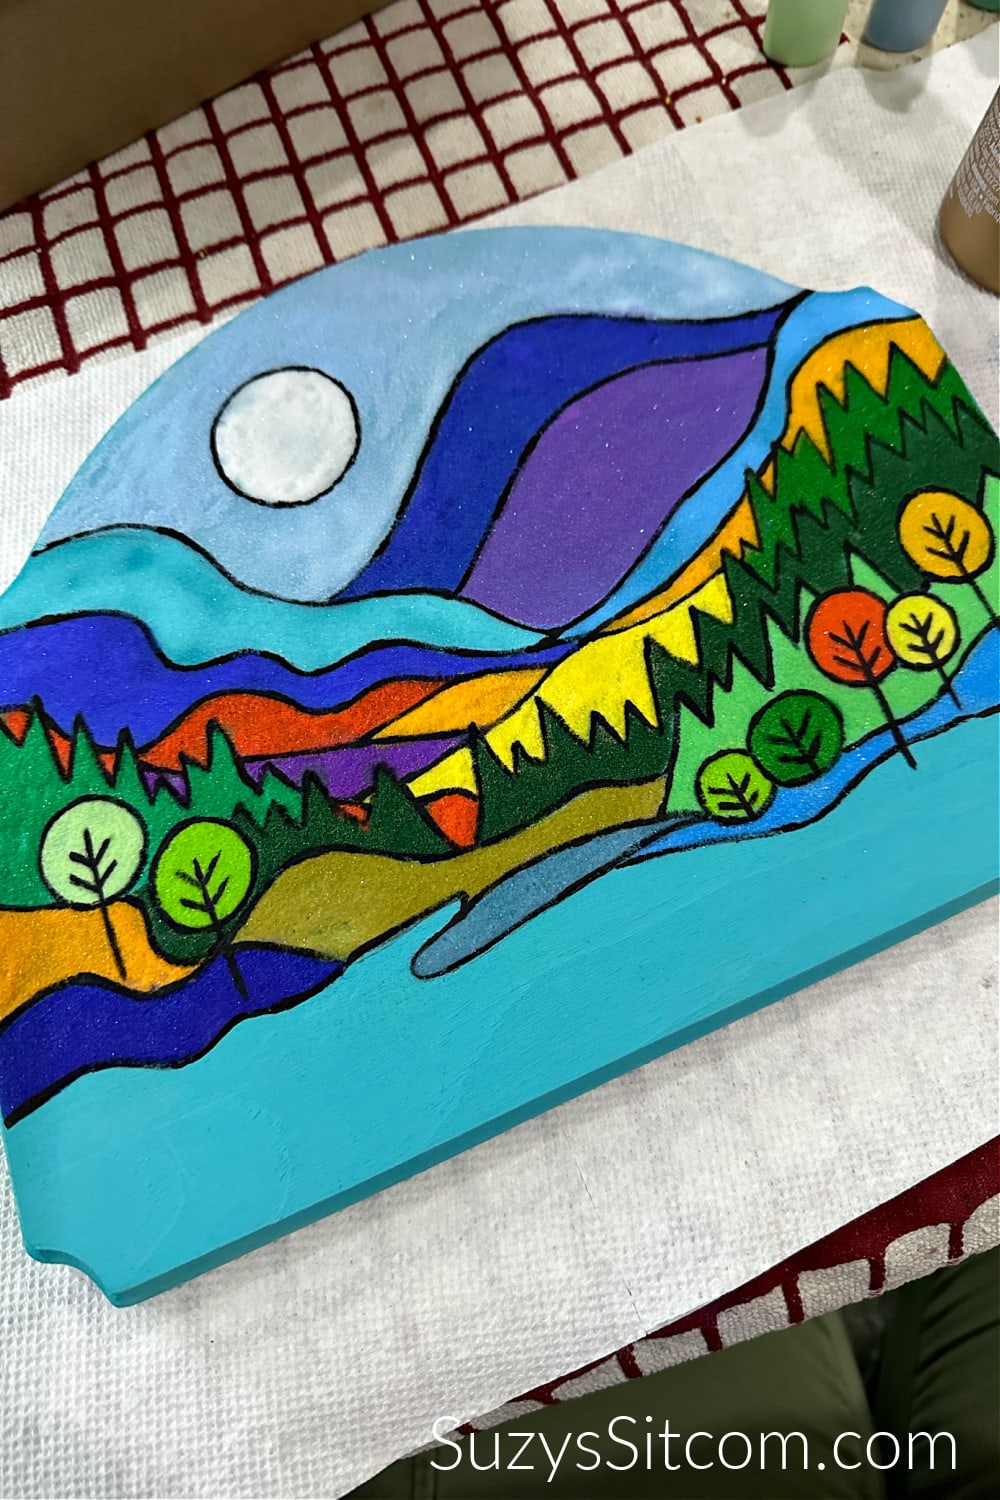 Sand Painting; Landscape art using colored sand.